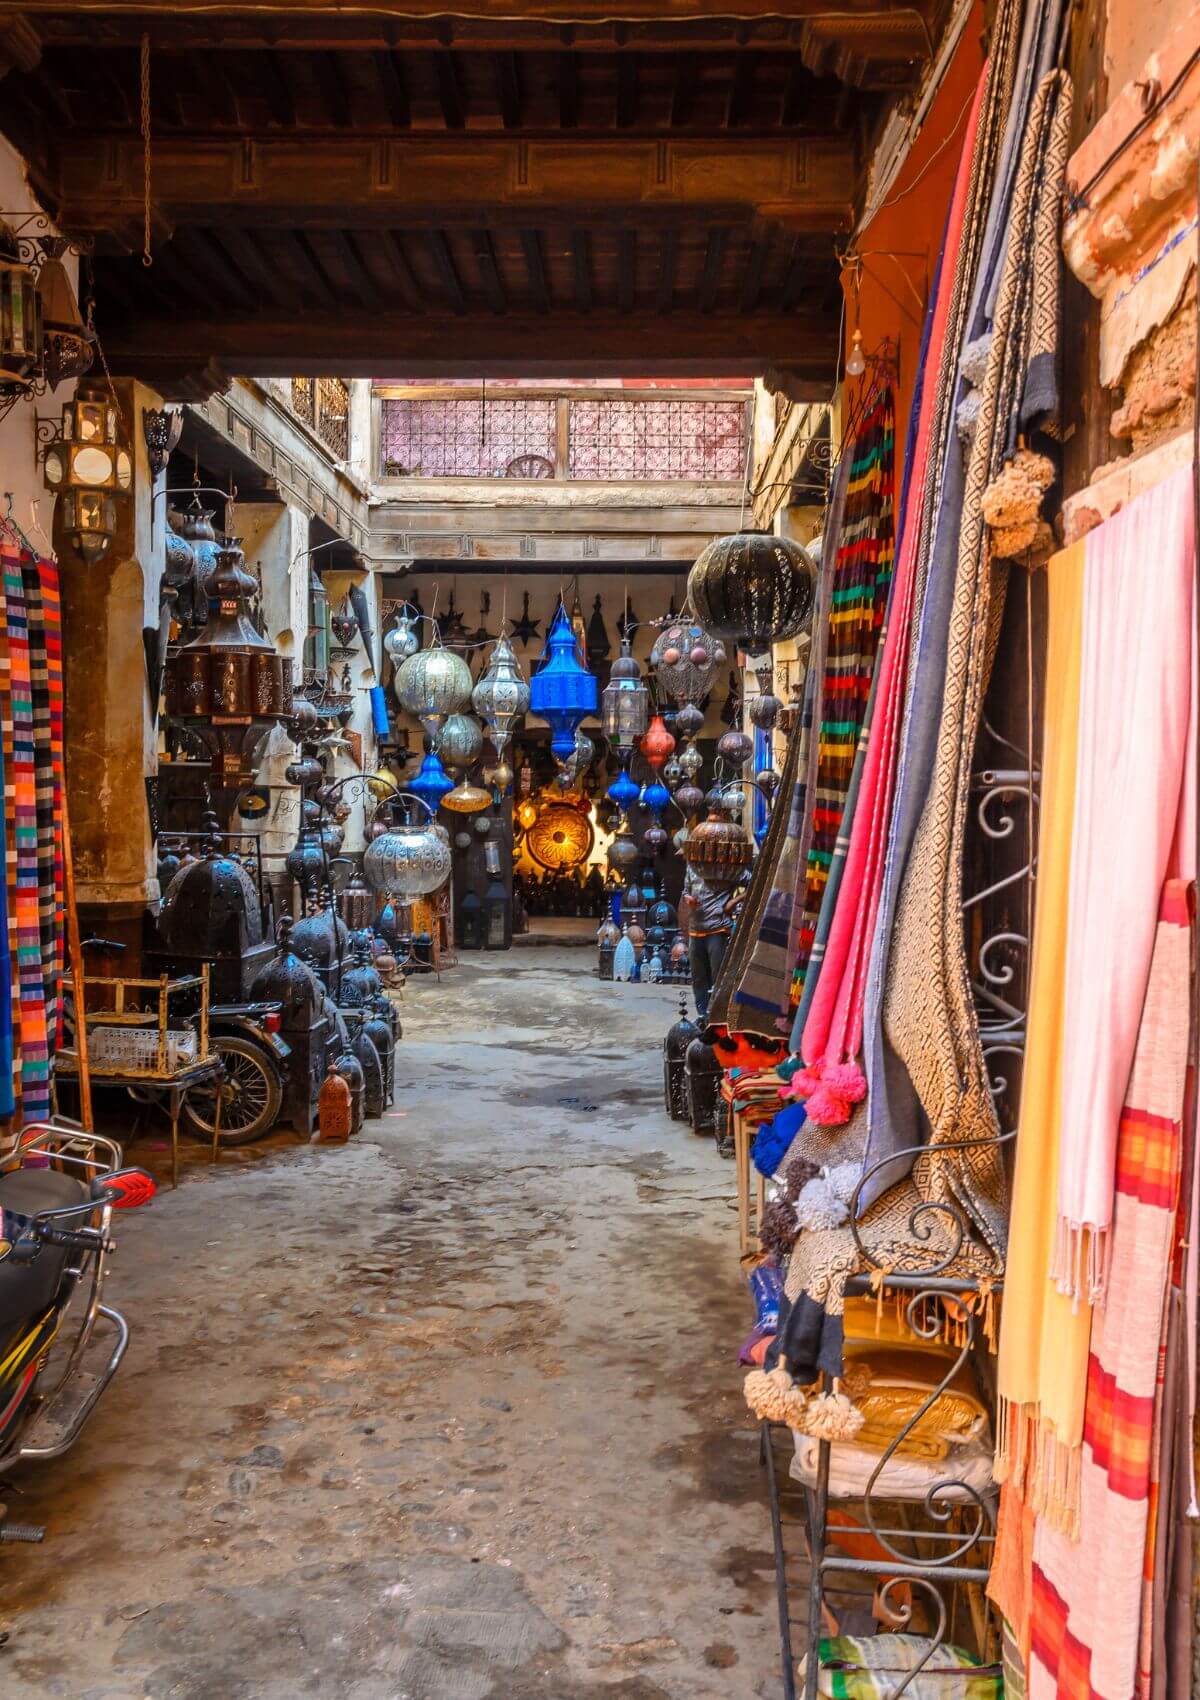 Shopping for souvenirs in Morocco